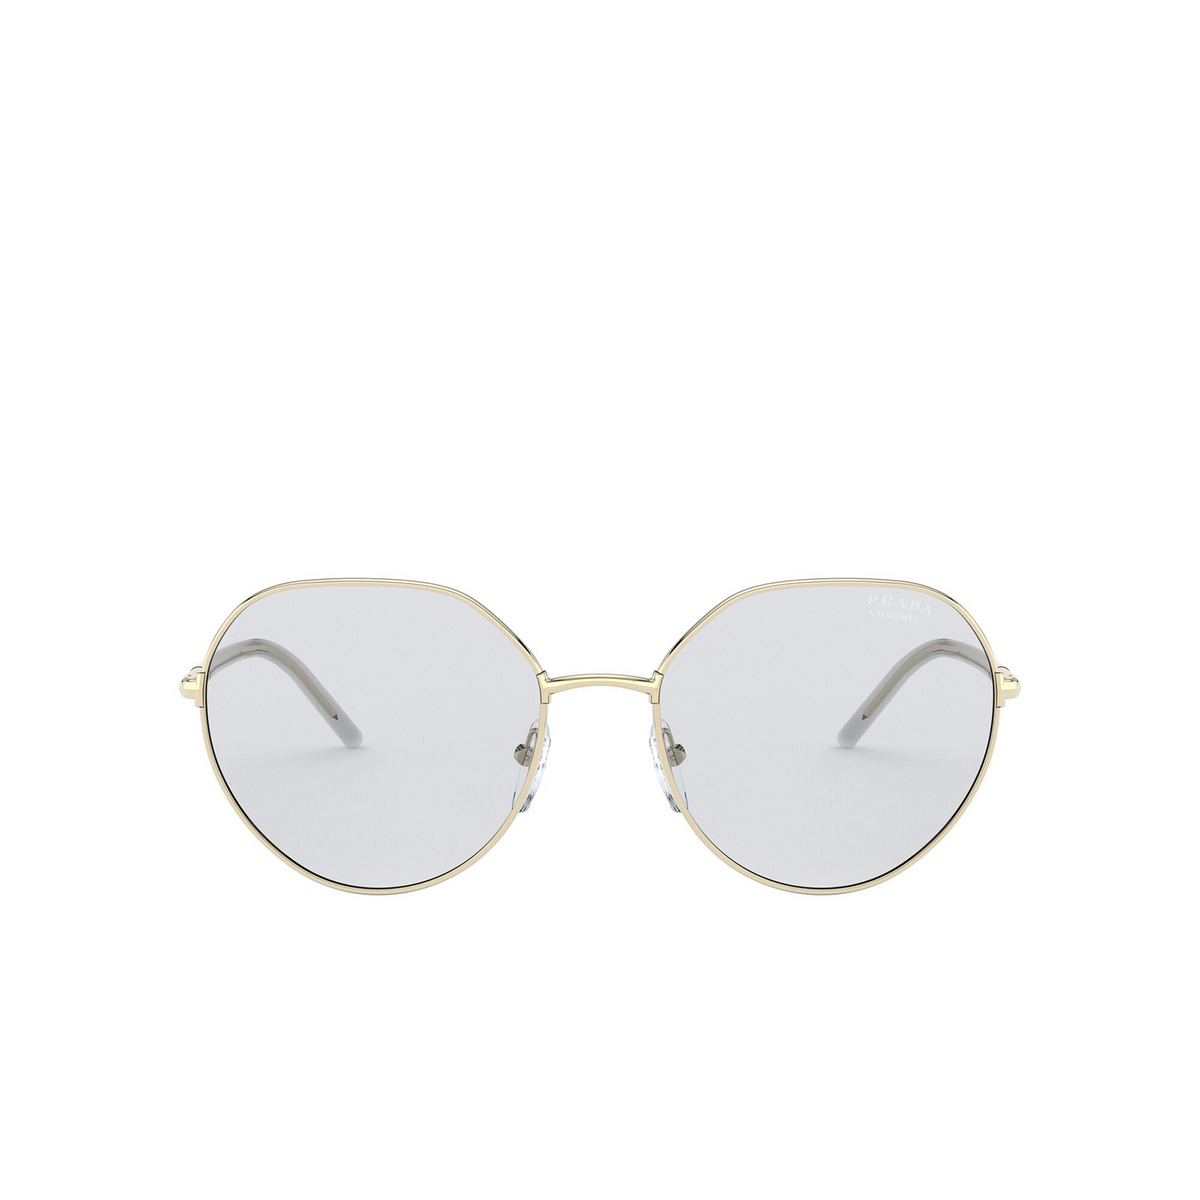 Prada® Round Sunglasses: PR 65XS color Pale Gold ZVN07D - front view.